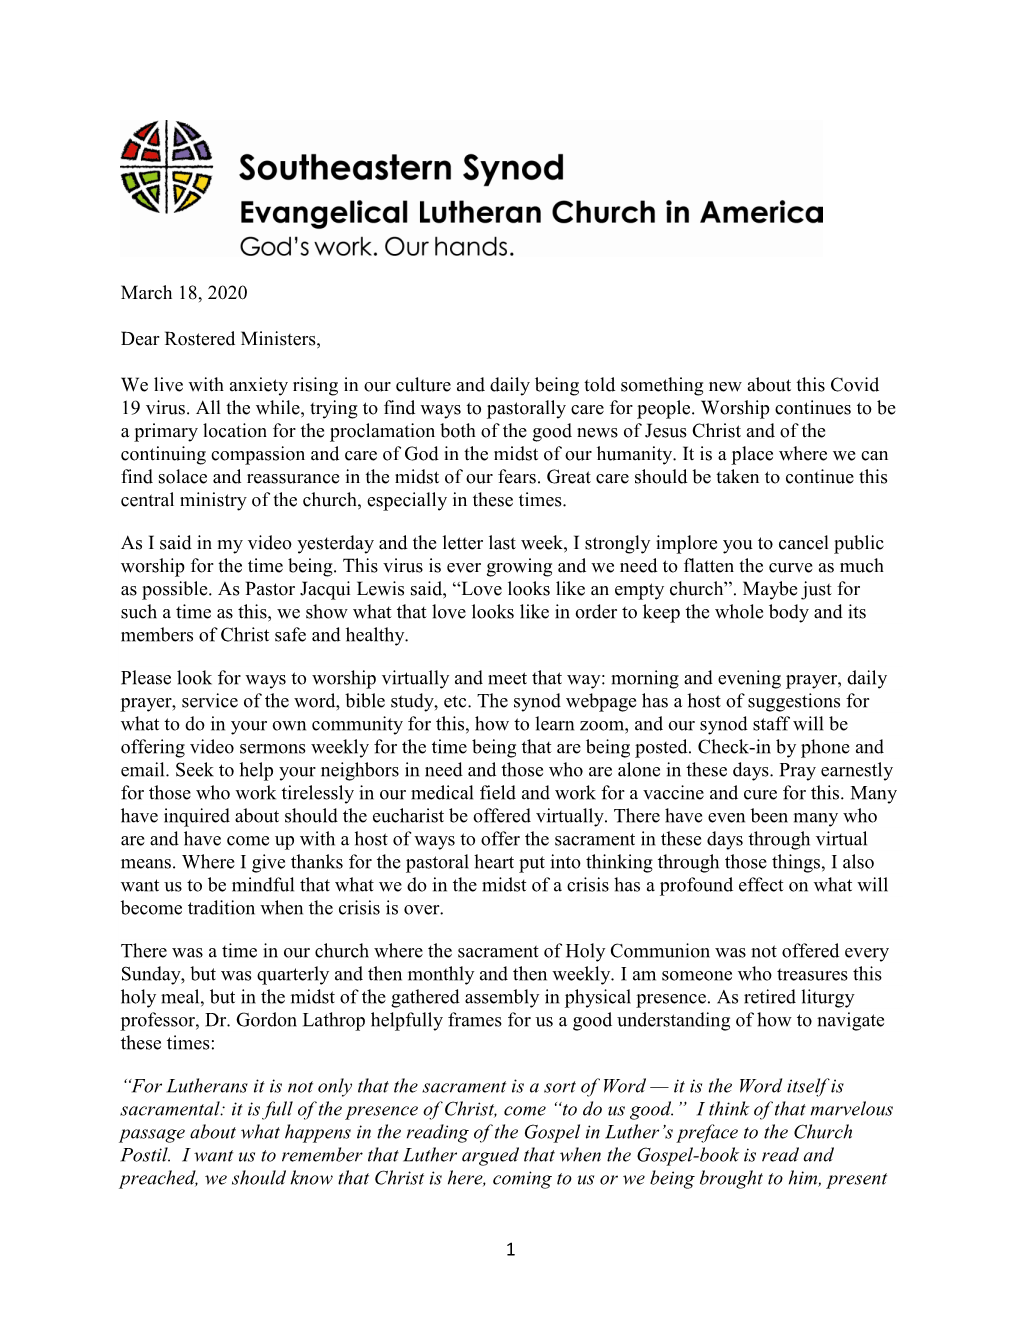 Read Bishop Strickland's Letter to Rostered Ministers About Worship in a Virtual